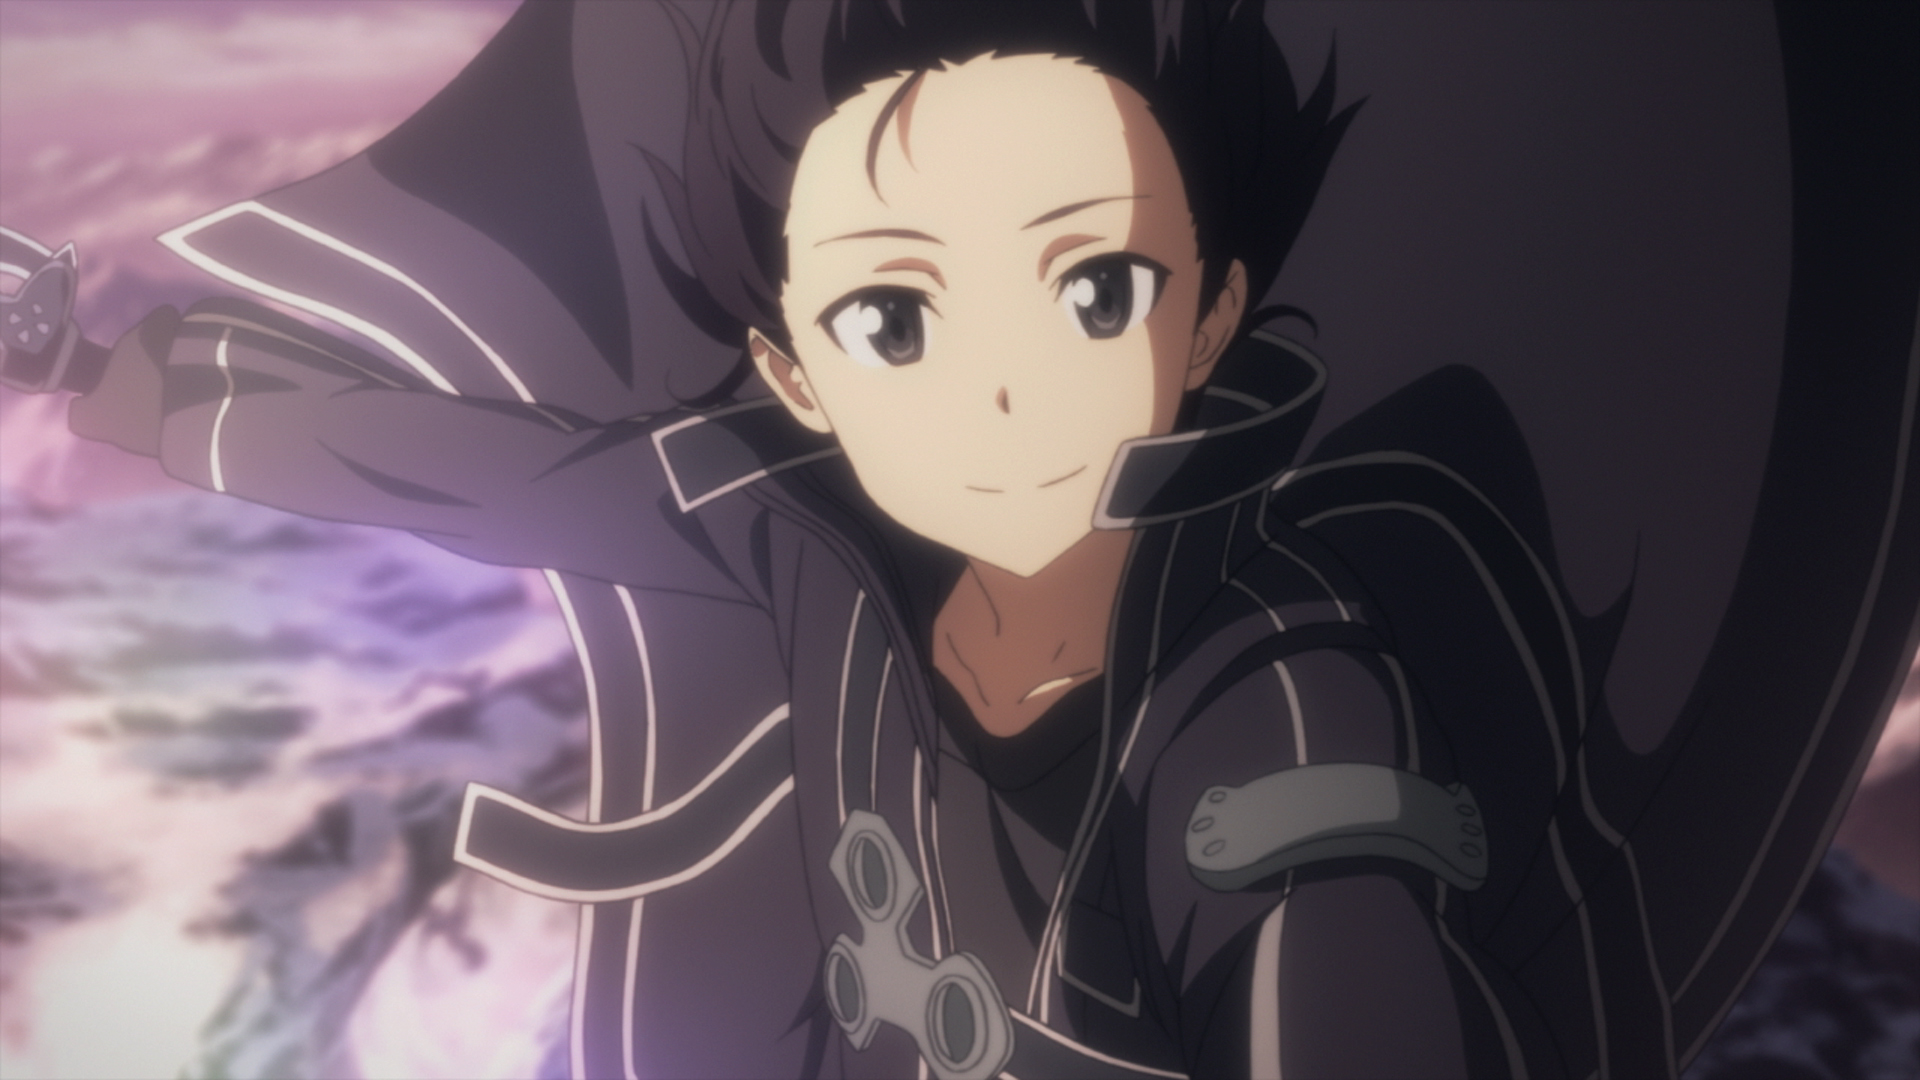 Sword Art Online: Progressive to be Screened in 28 Theaters in the